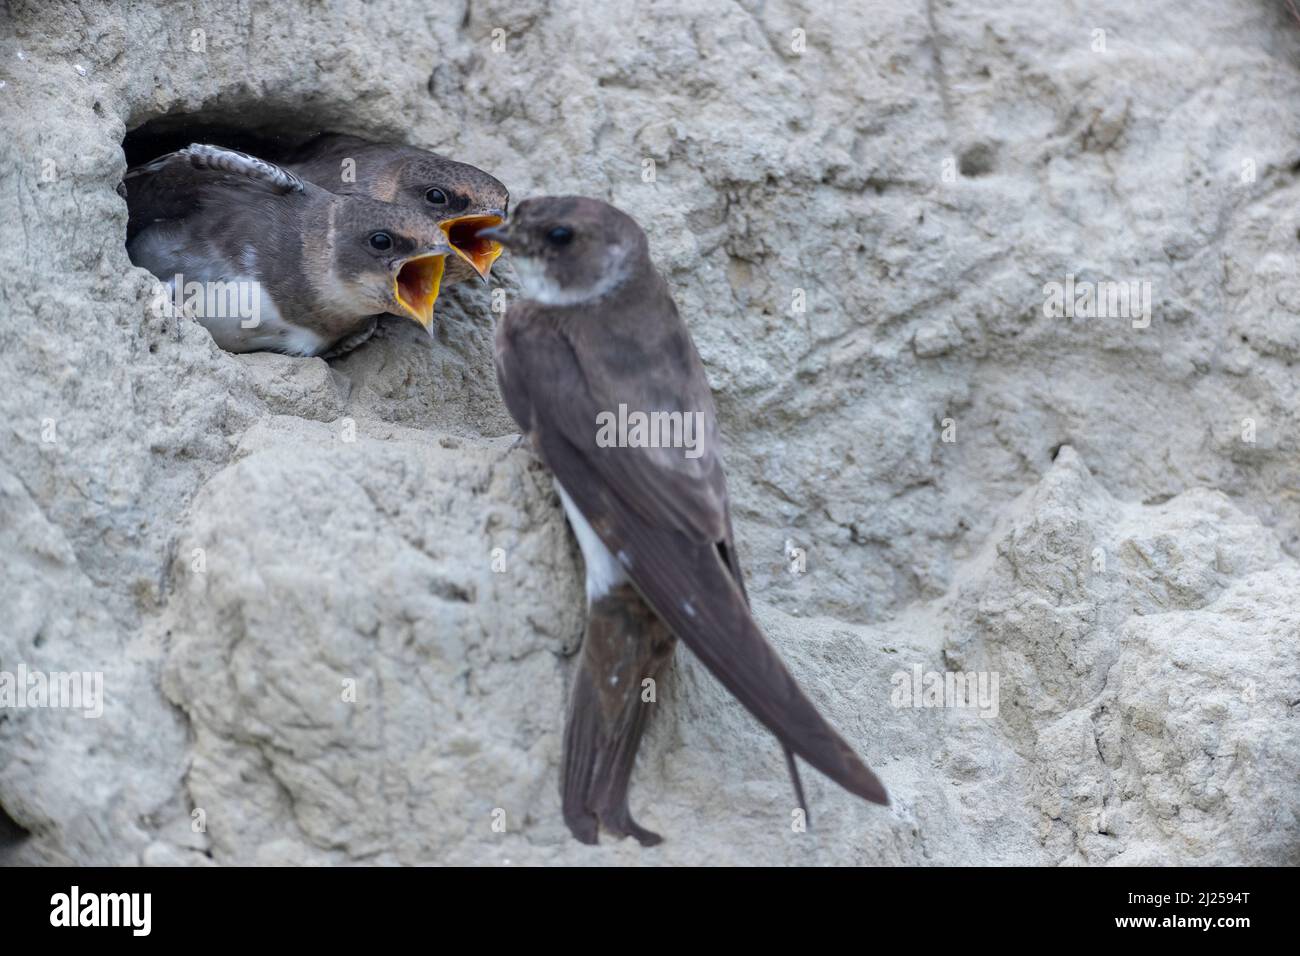 Sand martin (Riparia riparia). Despite feeding, the young birds continue to beg for food. Germany Stock Photo